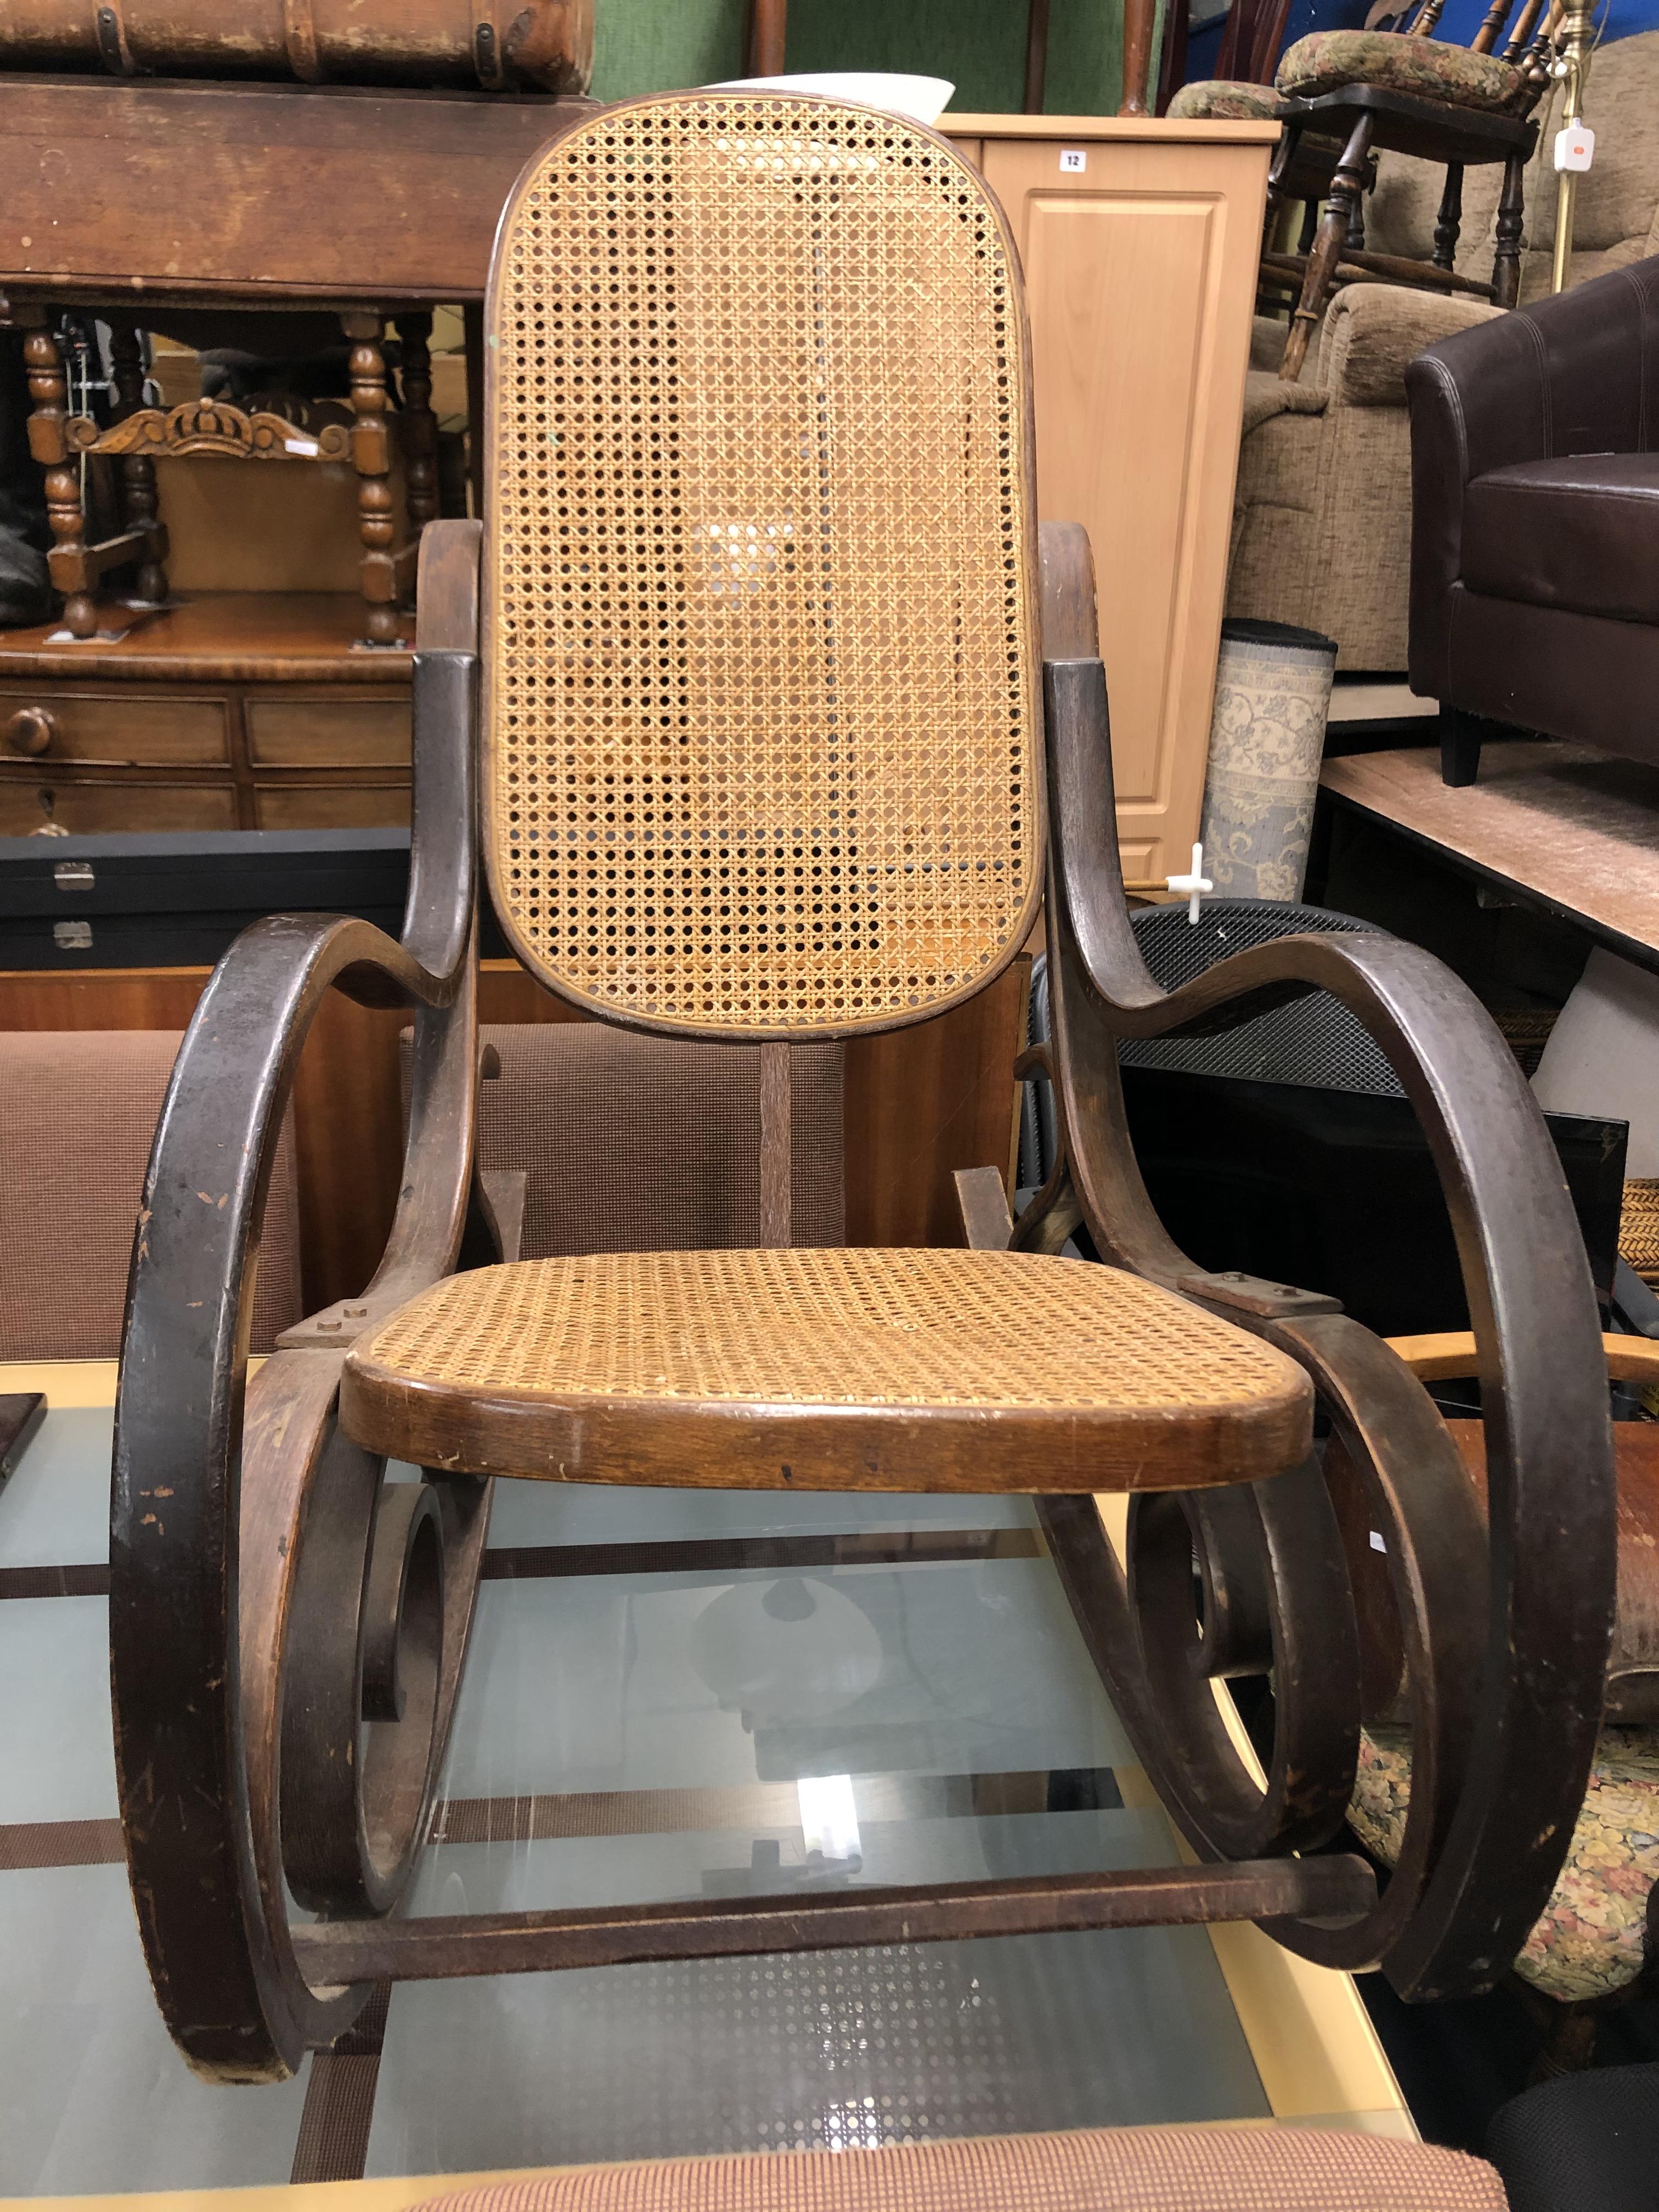 THONET STYLE BENTWOOD ROCKING CHAIR - Image 2 of 4